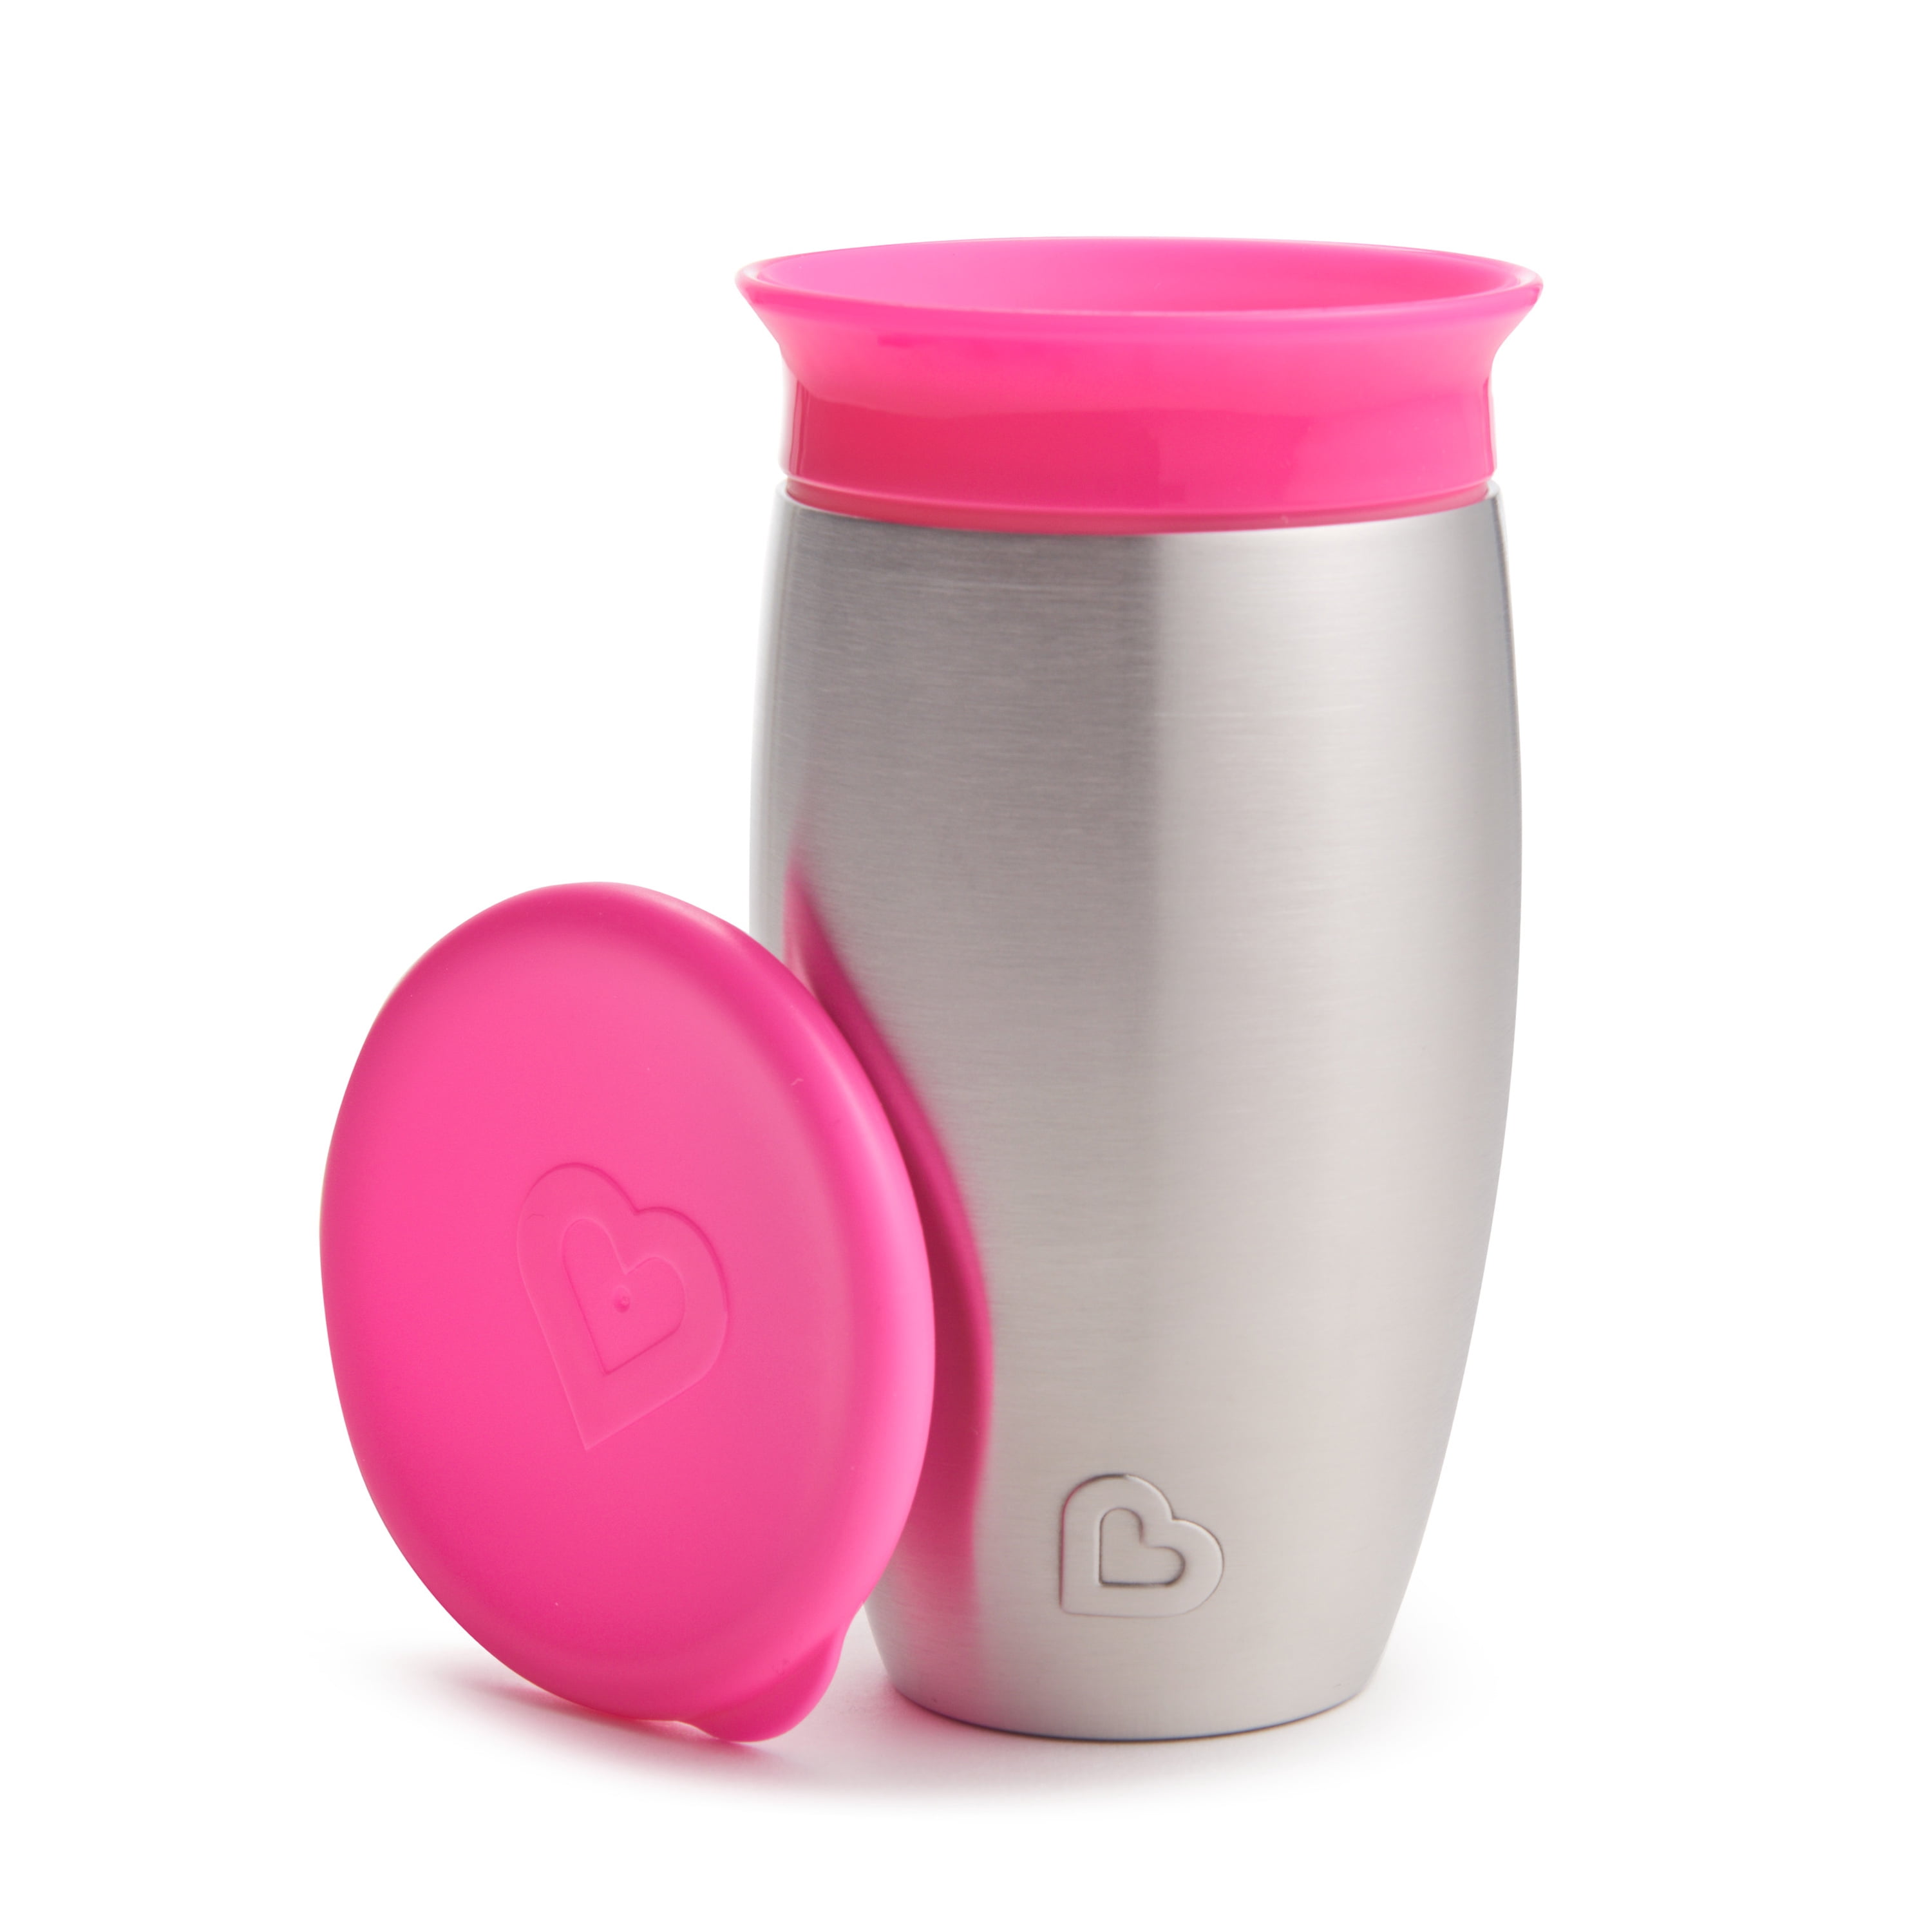 Munchkin Stainless Steel Miracle 360 10oz Sippy Cup, Pink - Walmart.com Munchkin Sippy Cup Stainless Steel